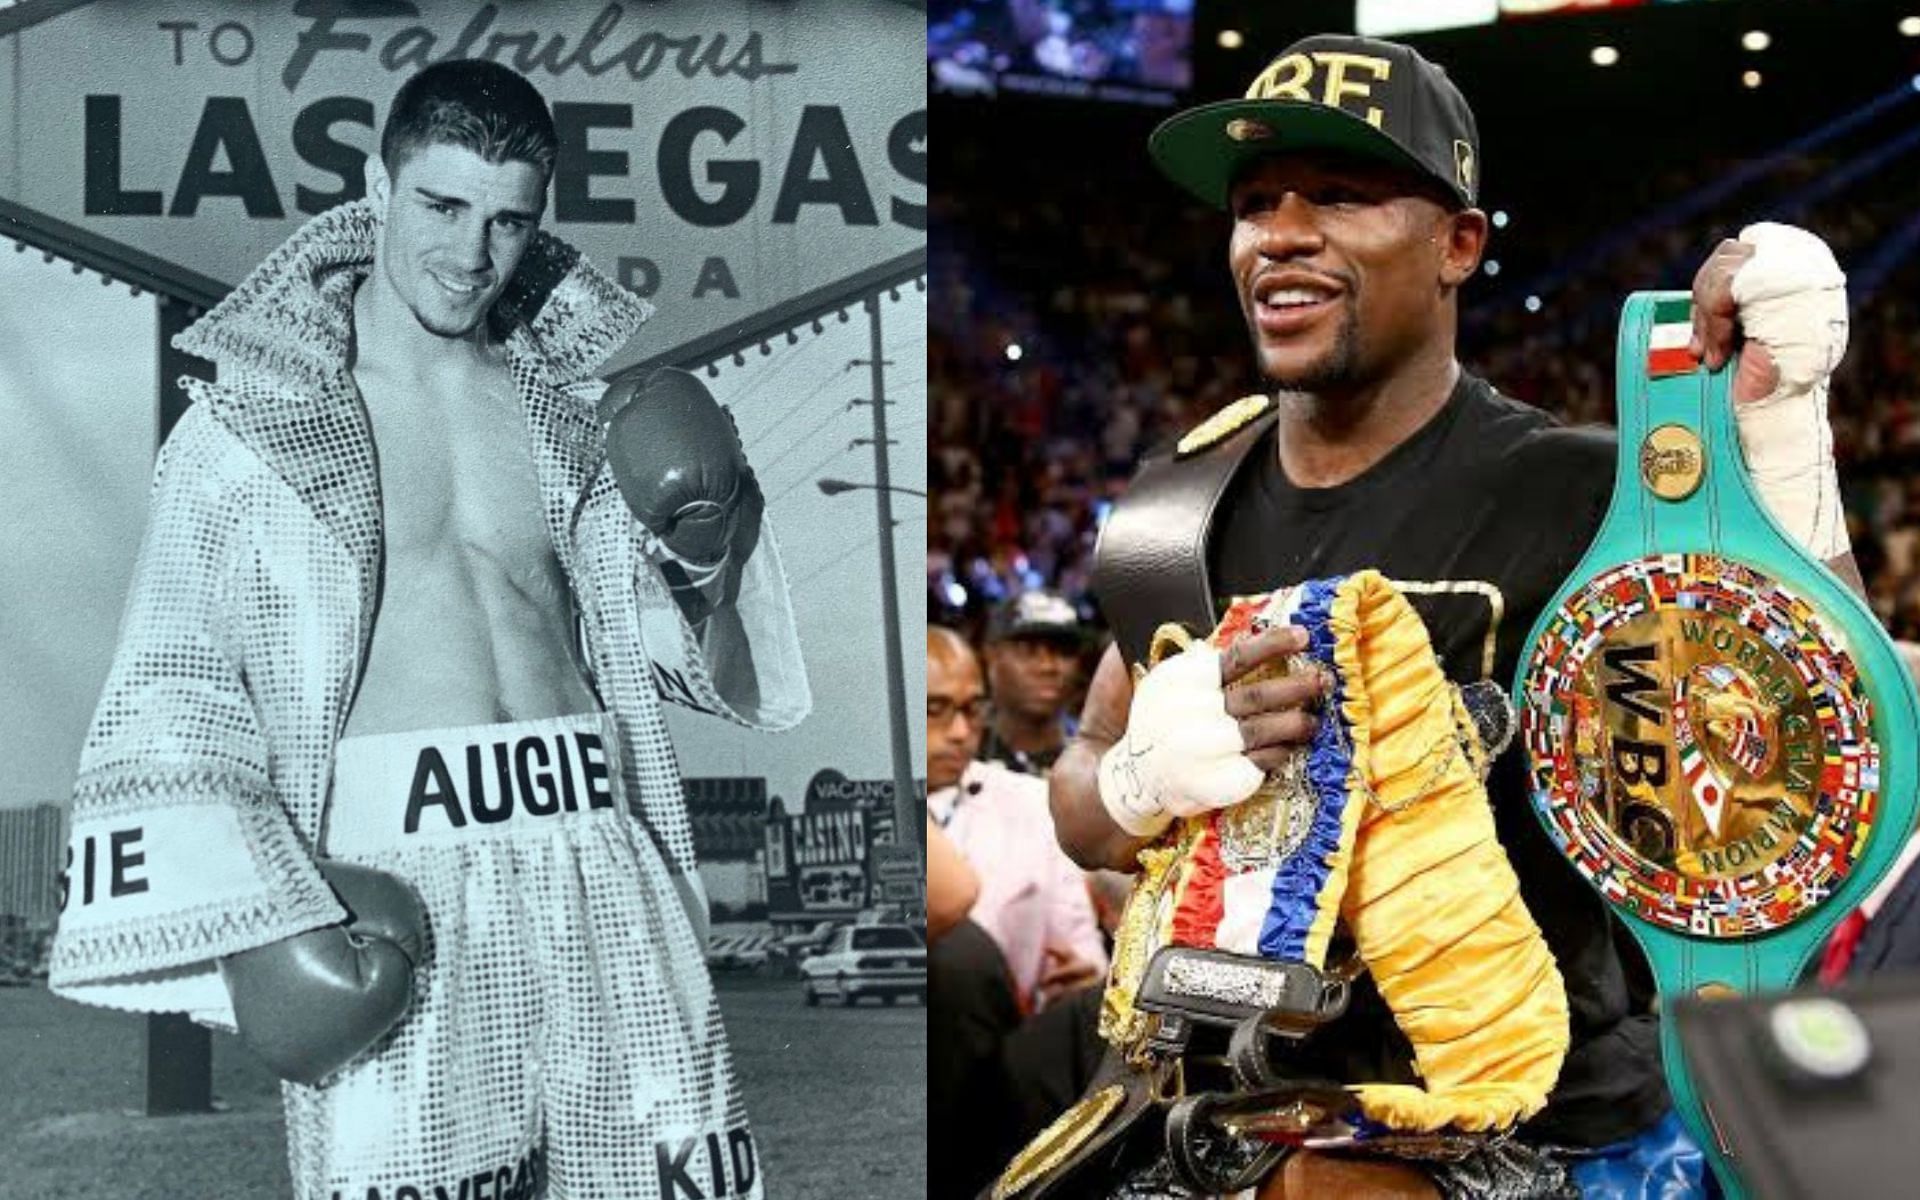 A 20-year-old Augie Sanchez (left) and Floyd Mayweather. (Photos by @augie.sanchez.77 Instagram and Getty Images)